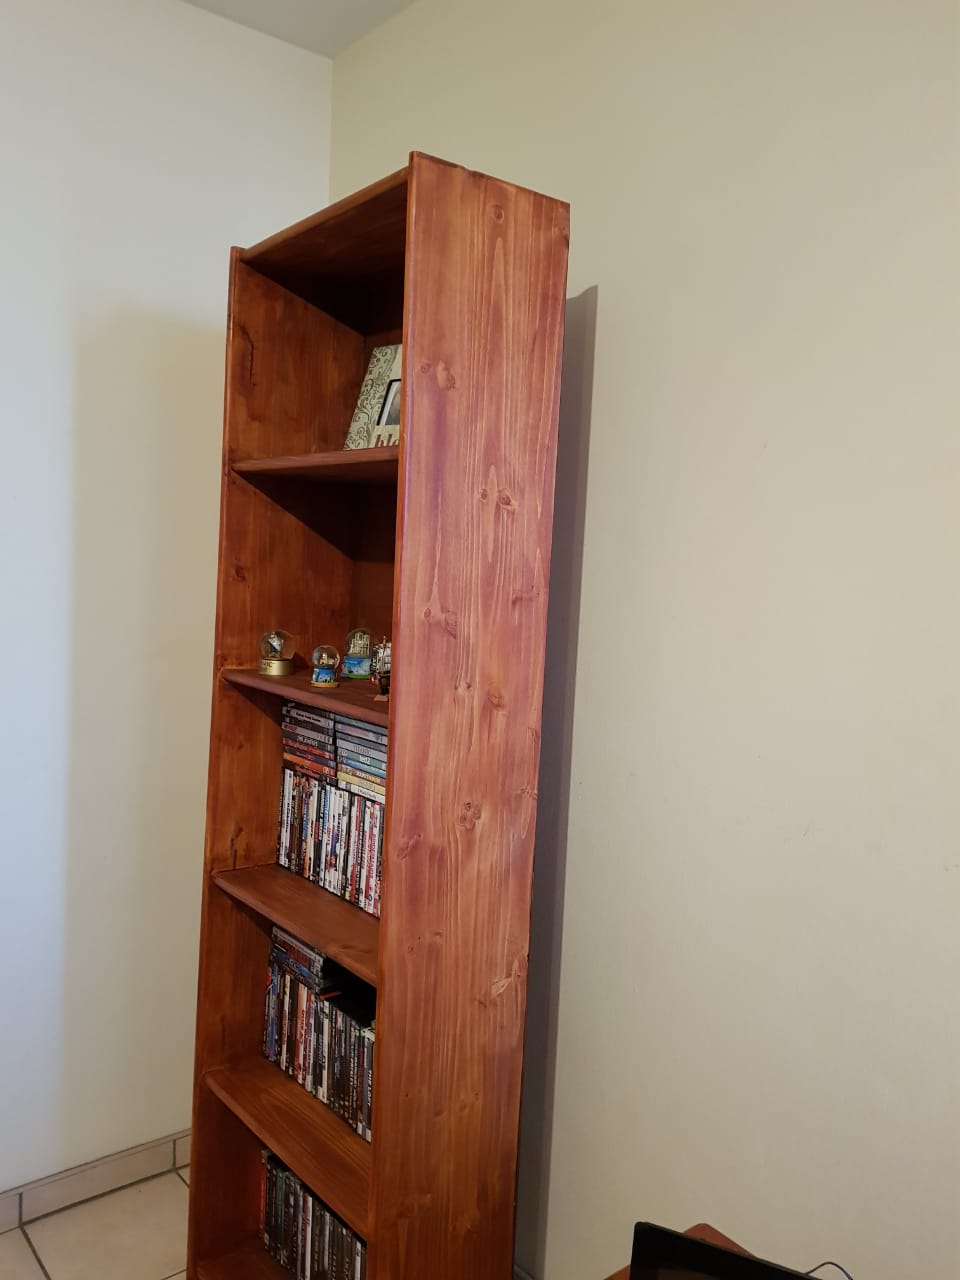 Five Tier Bookshelf For Sale As New Junk Mail